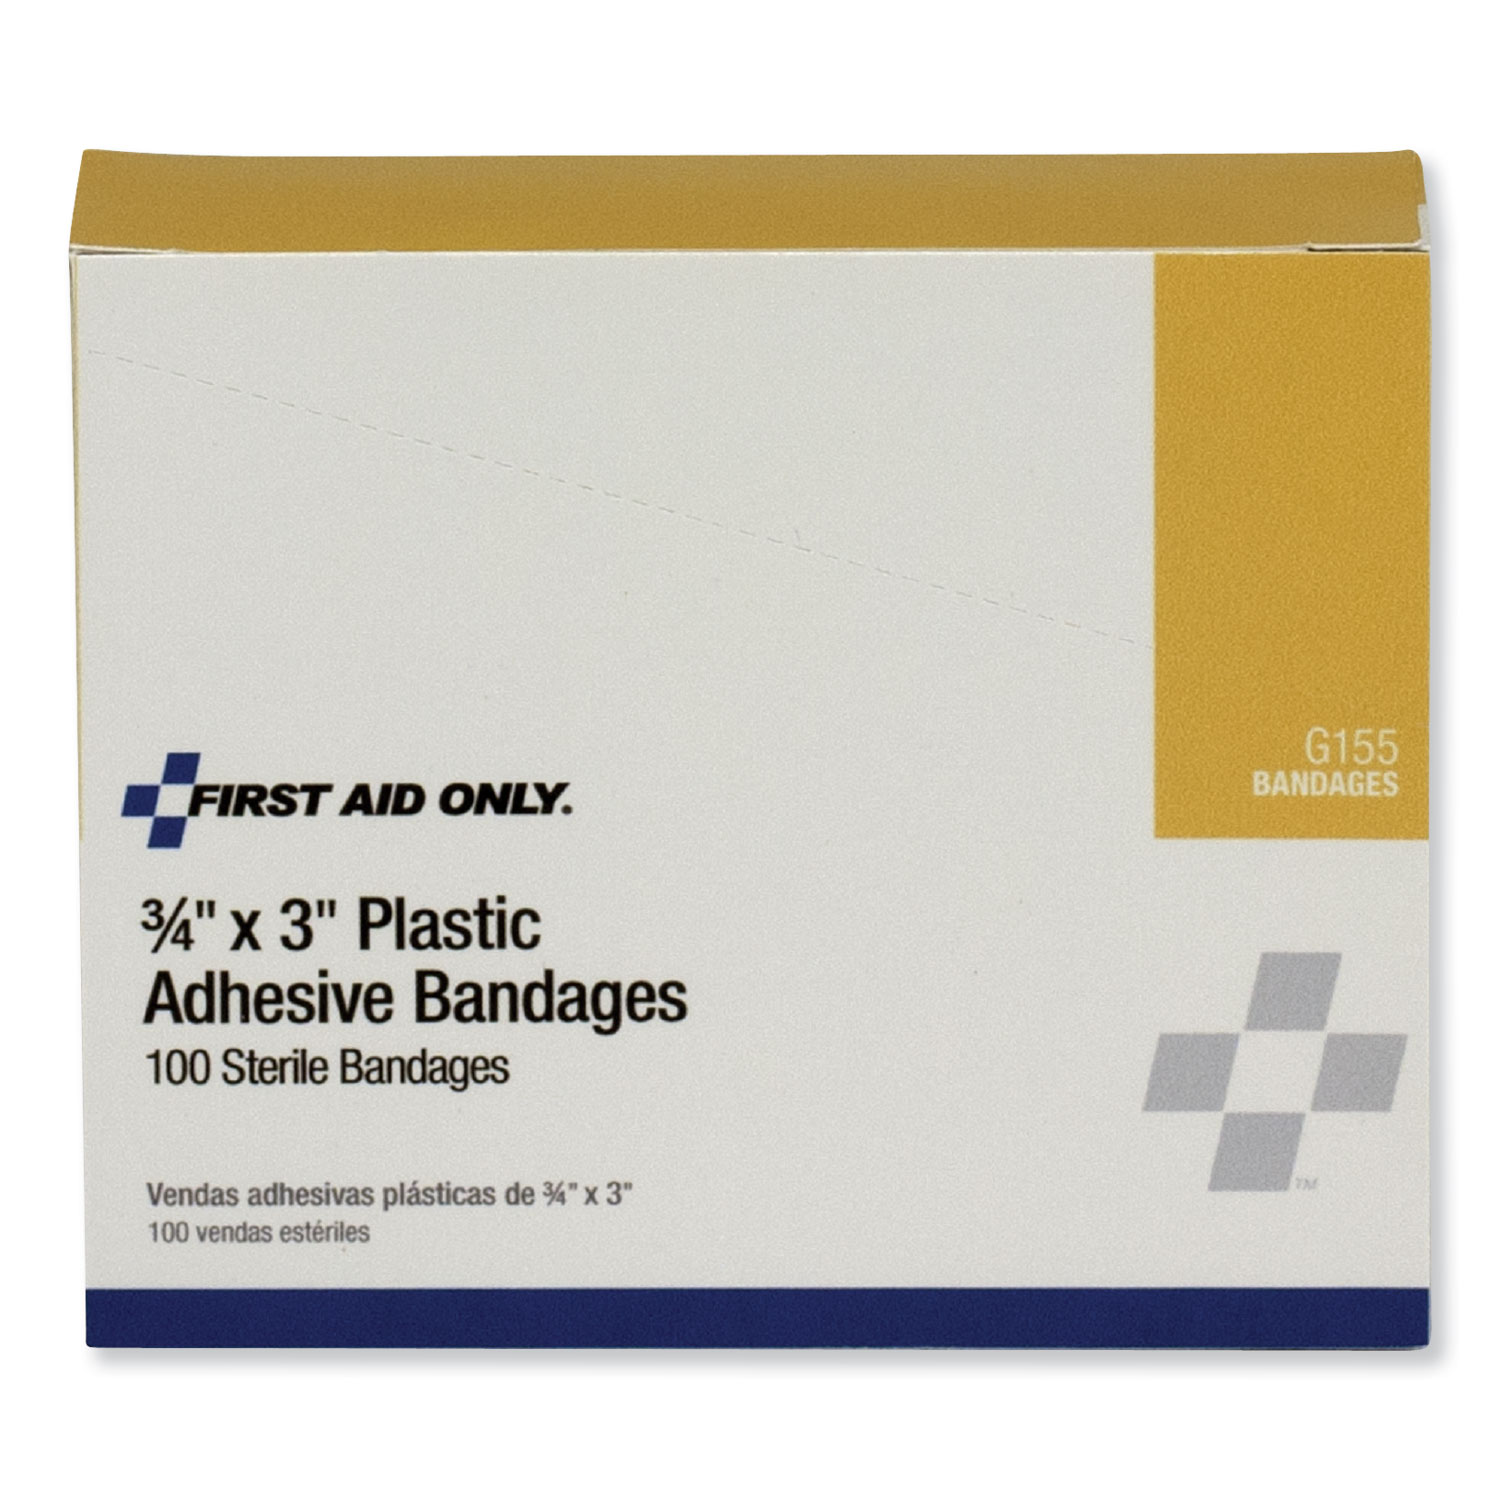 First Aid Plastic Bandages, 3/4